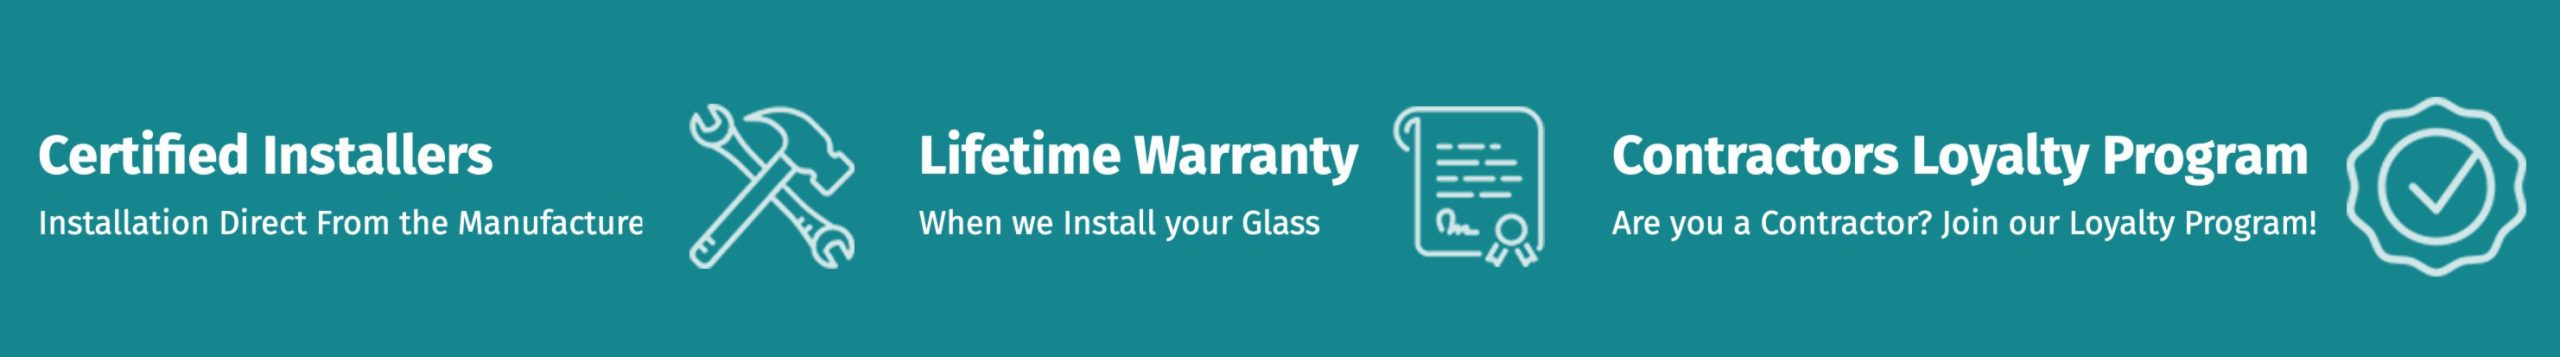 <br />
Certified Installers<br />
Installation Direct From the Manufacturer |<br />
Lifetime Warranty<br />
When we Install your Glass |<br />
Contractors Loyalty Program<br />
Are you a Contractor? Join our Loyalty Program!</p>
<p>